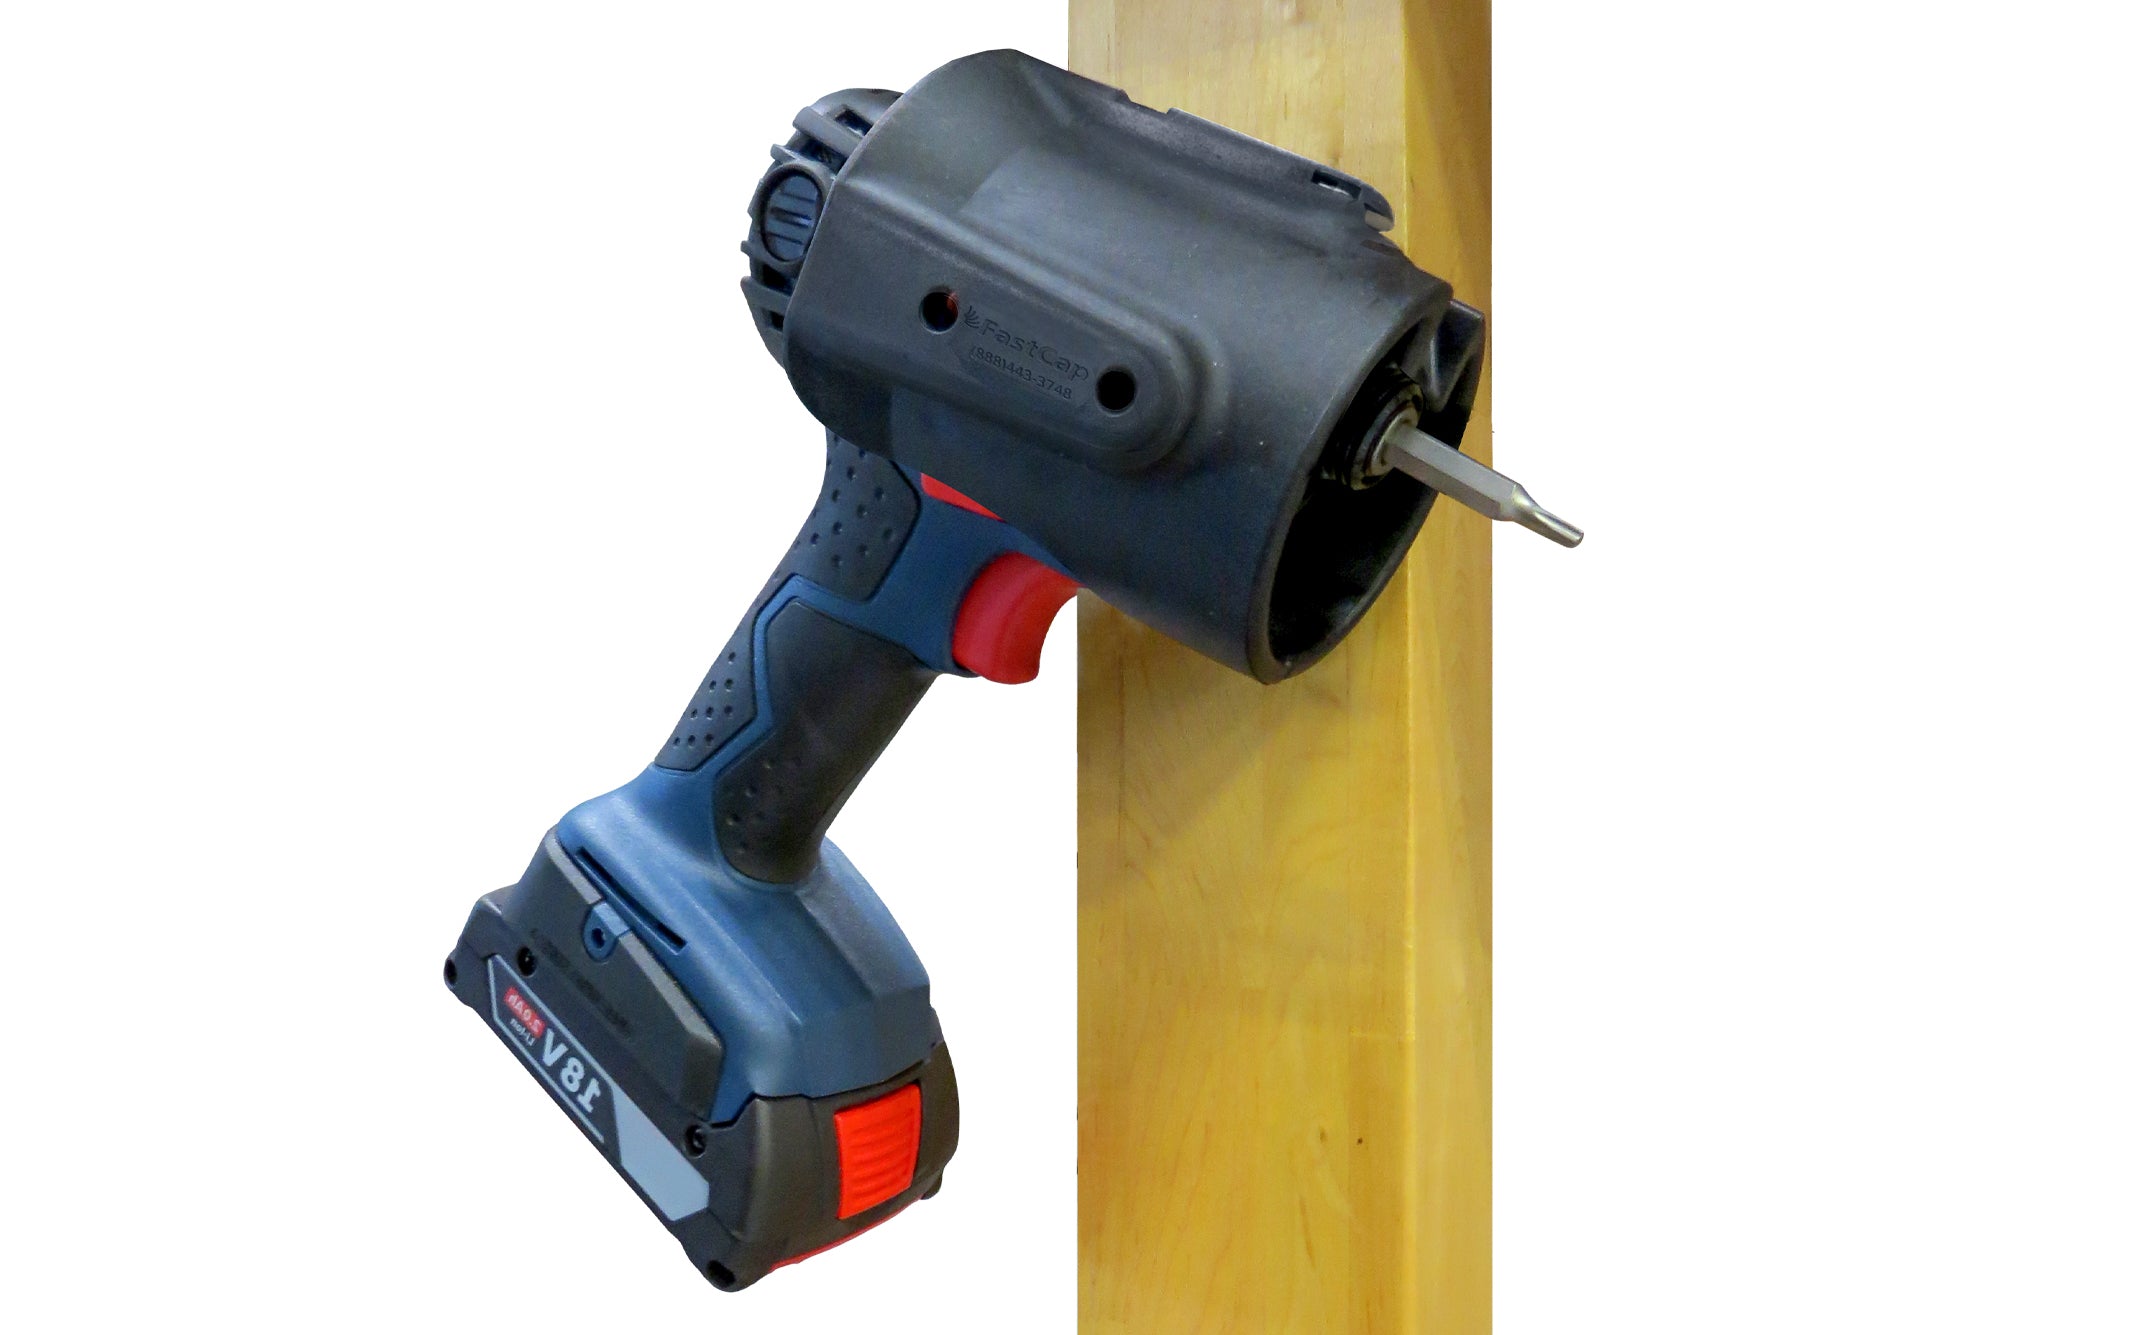 Screw gun holder is versatile tool holder for your drill, screw gun, or almost any other tool - Helps keeps your drills & screw guns organized - Fits most drills, drivers, screw guns, large tools, etc. - SGH OPEN - SGH CLOSED - SGH WALL BRACKET - SGH BACK BRACKET - FastCap Screw Gun Holder - Power Drill Organizer